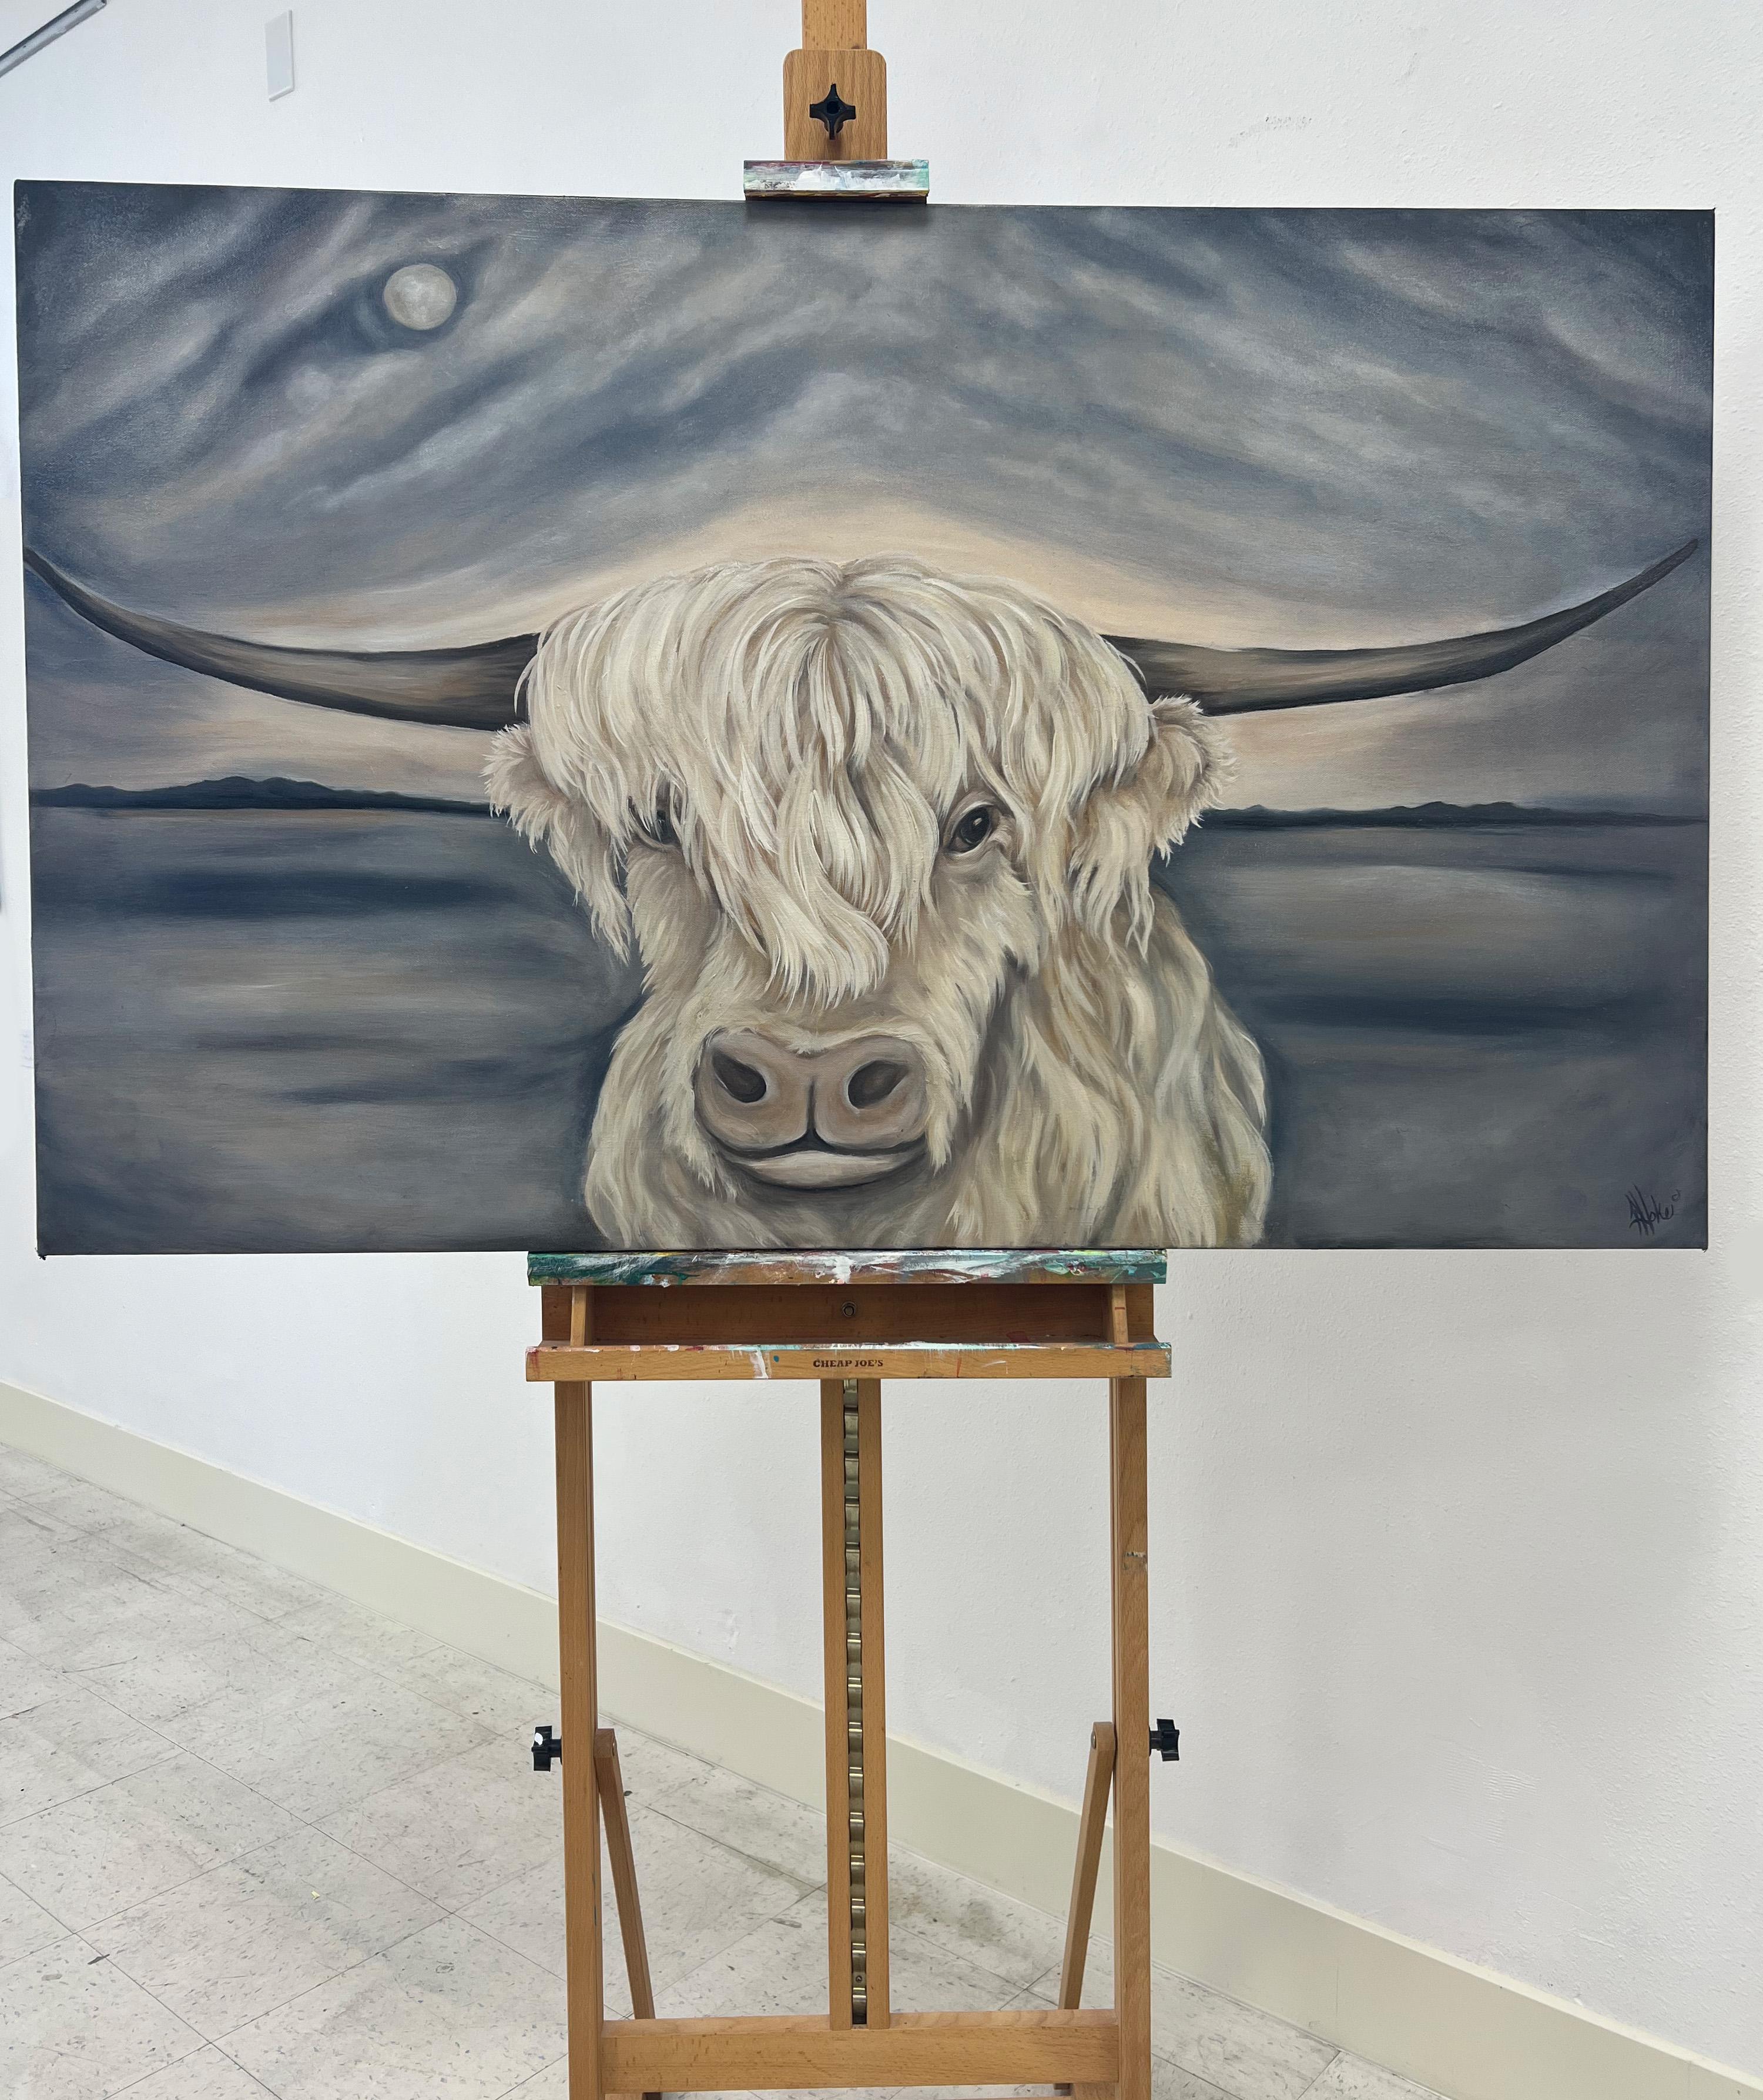 <p>Artist Comments<br>Artist Pamela Hoke displays a monochromatic portrait of a highland cattle. She captures the serenity of a majestic yet gentle and beautiful cow. 